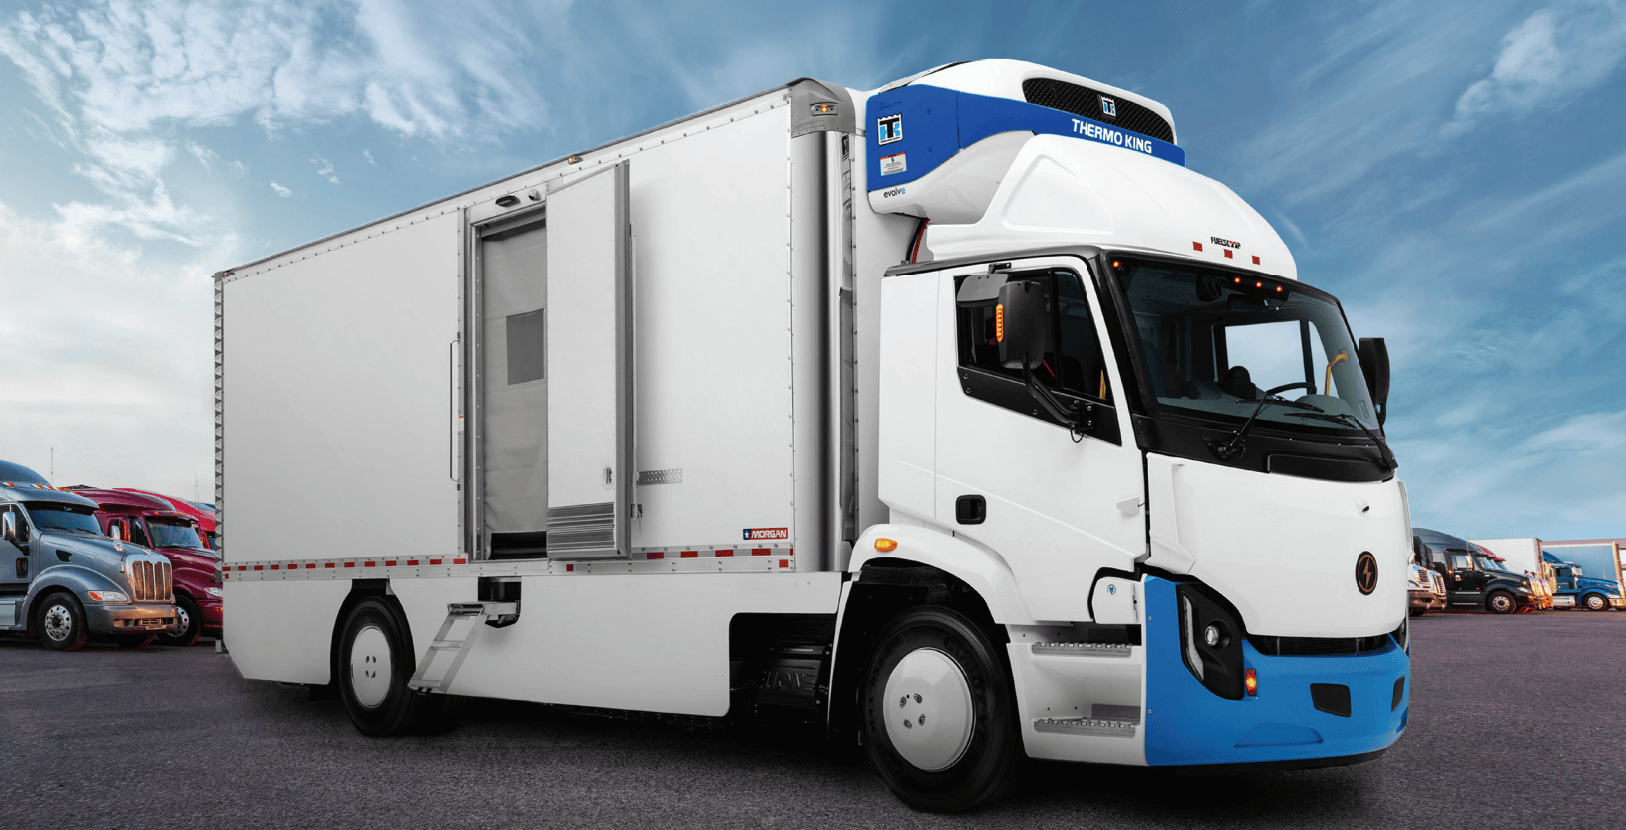 A Thermo King refrigeration truck